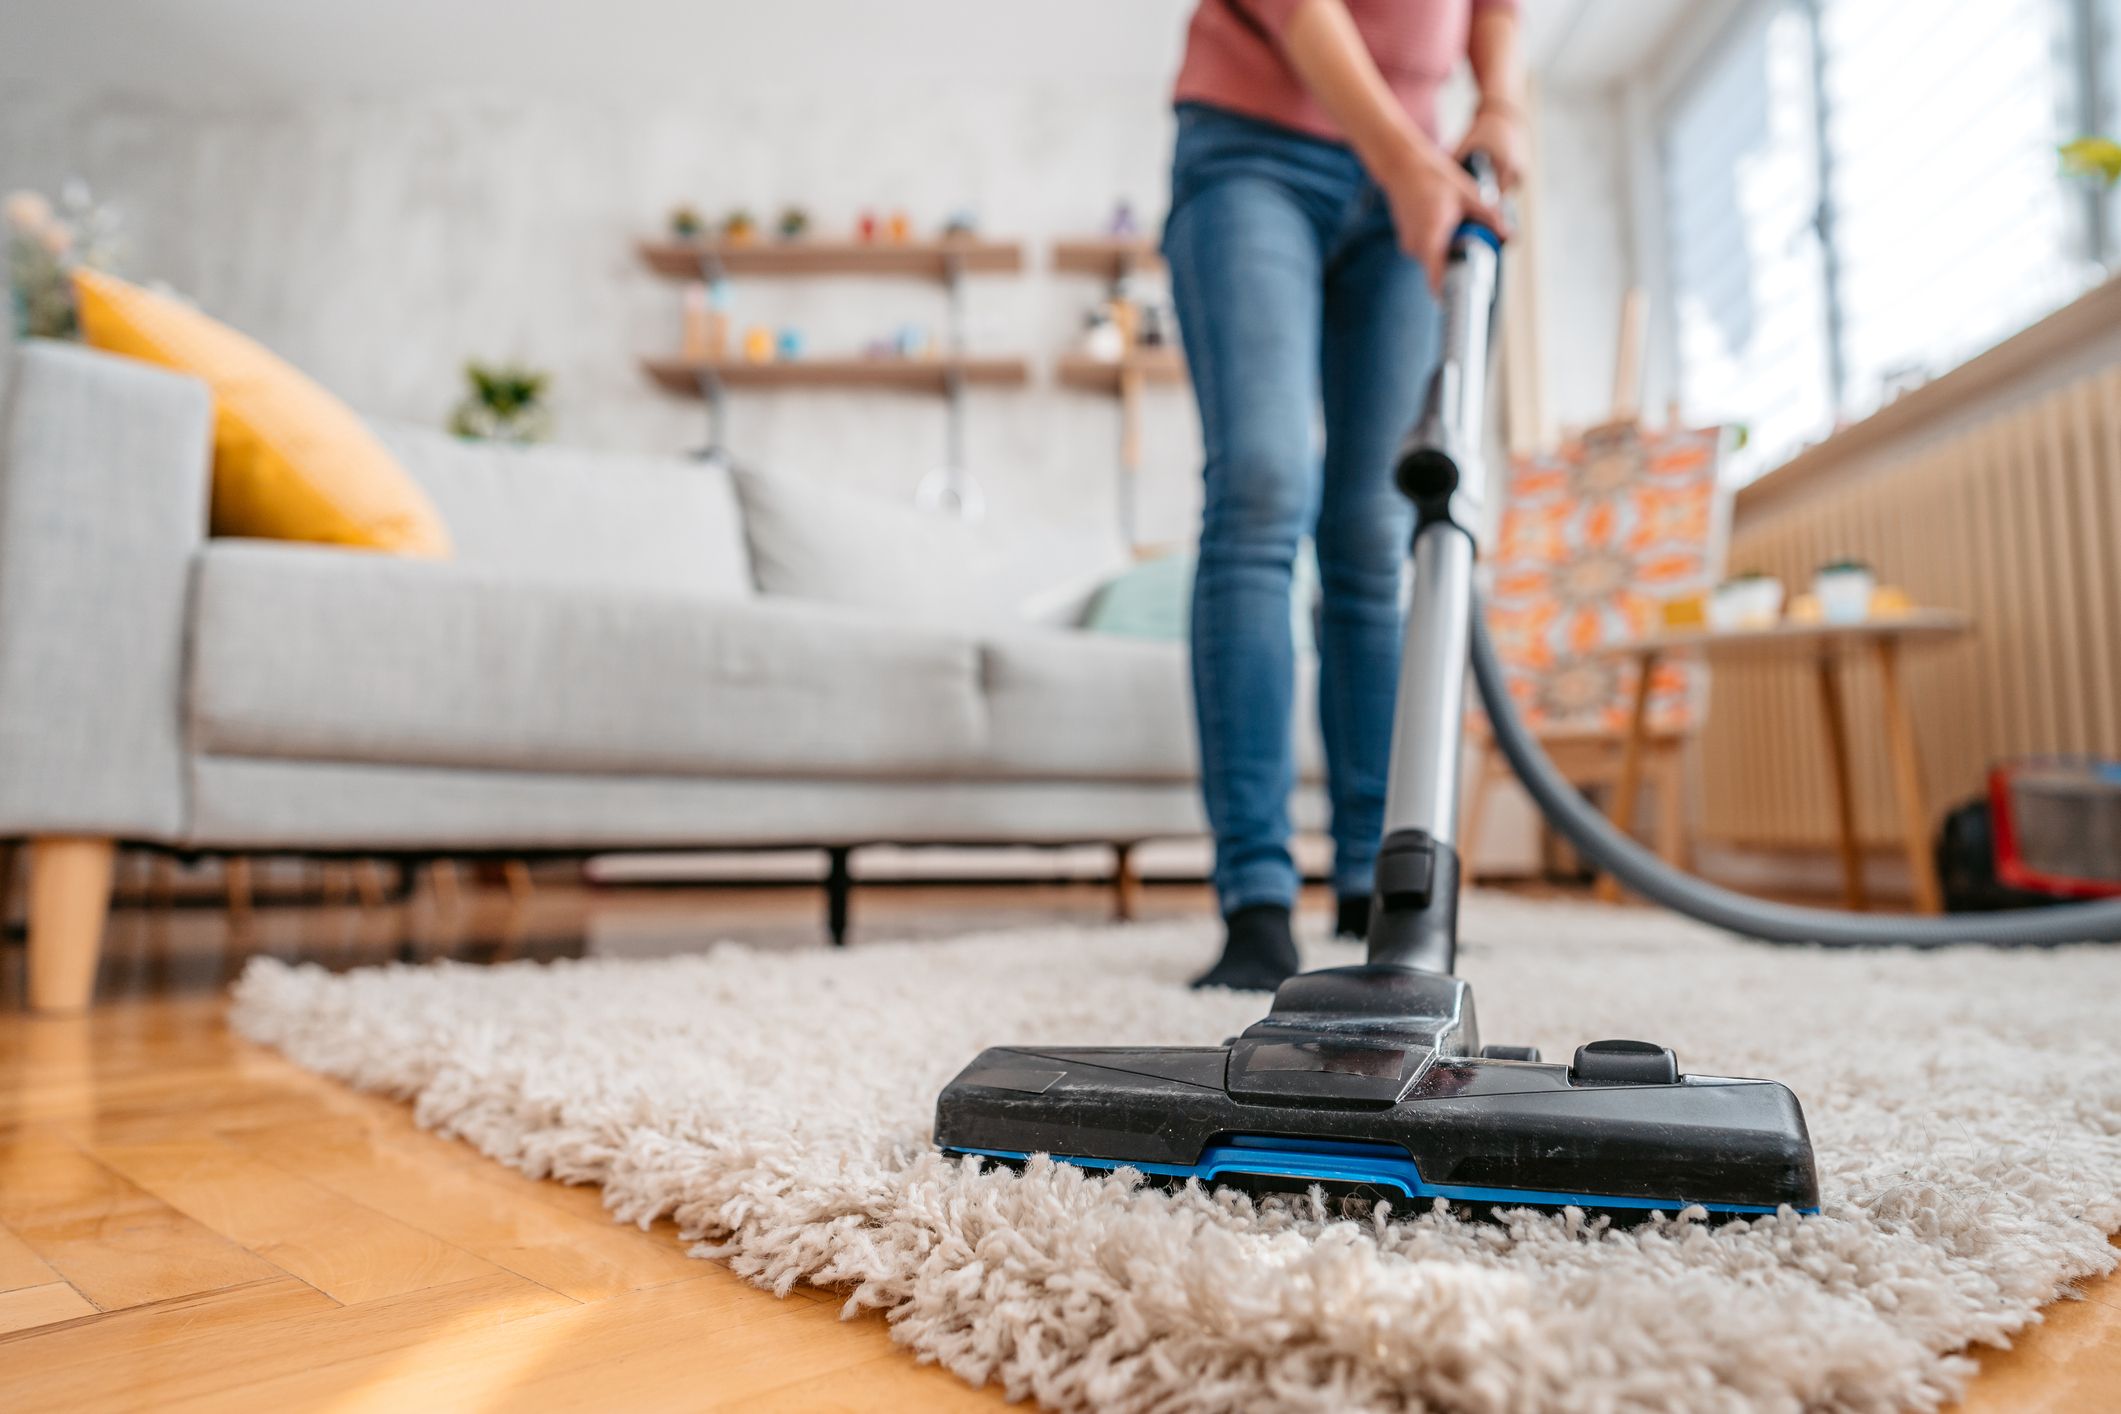 How To Clean With A Hoover Carpet Cleaner